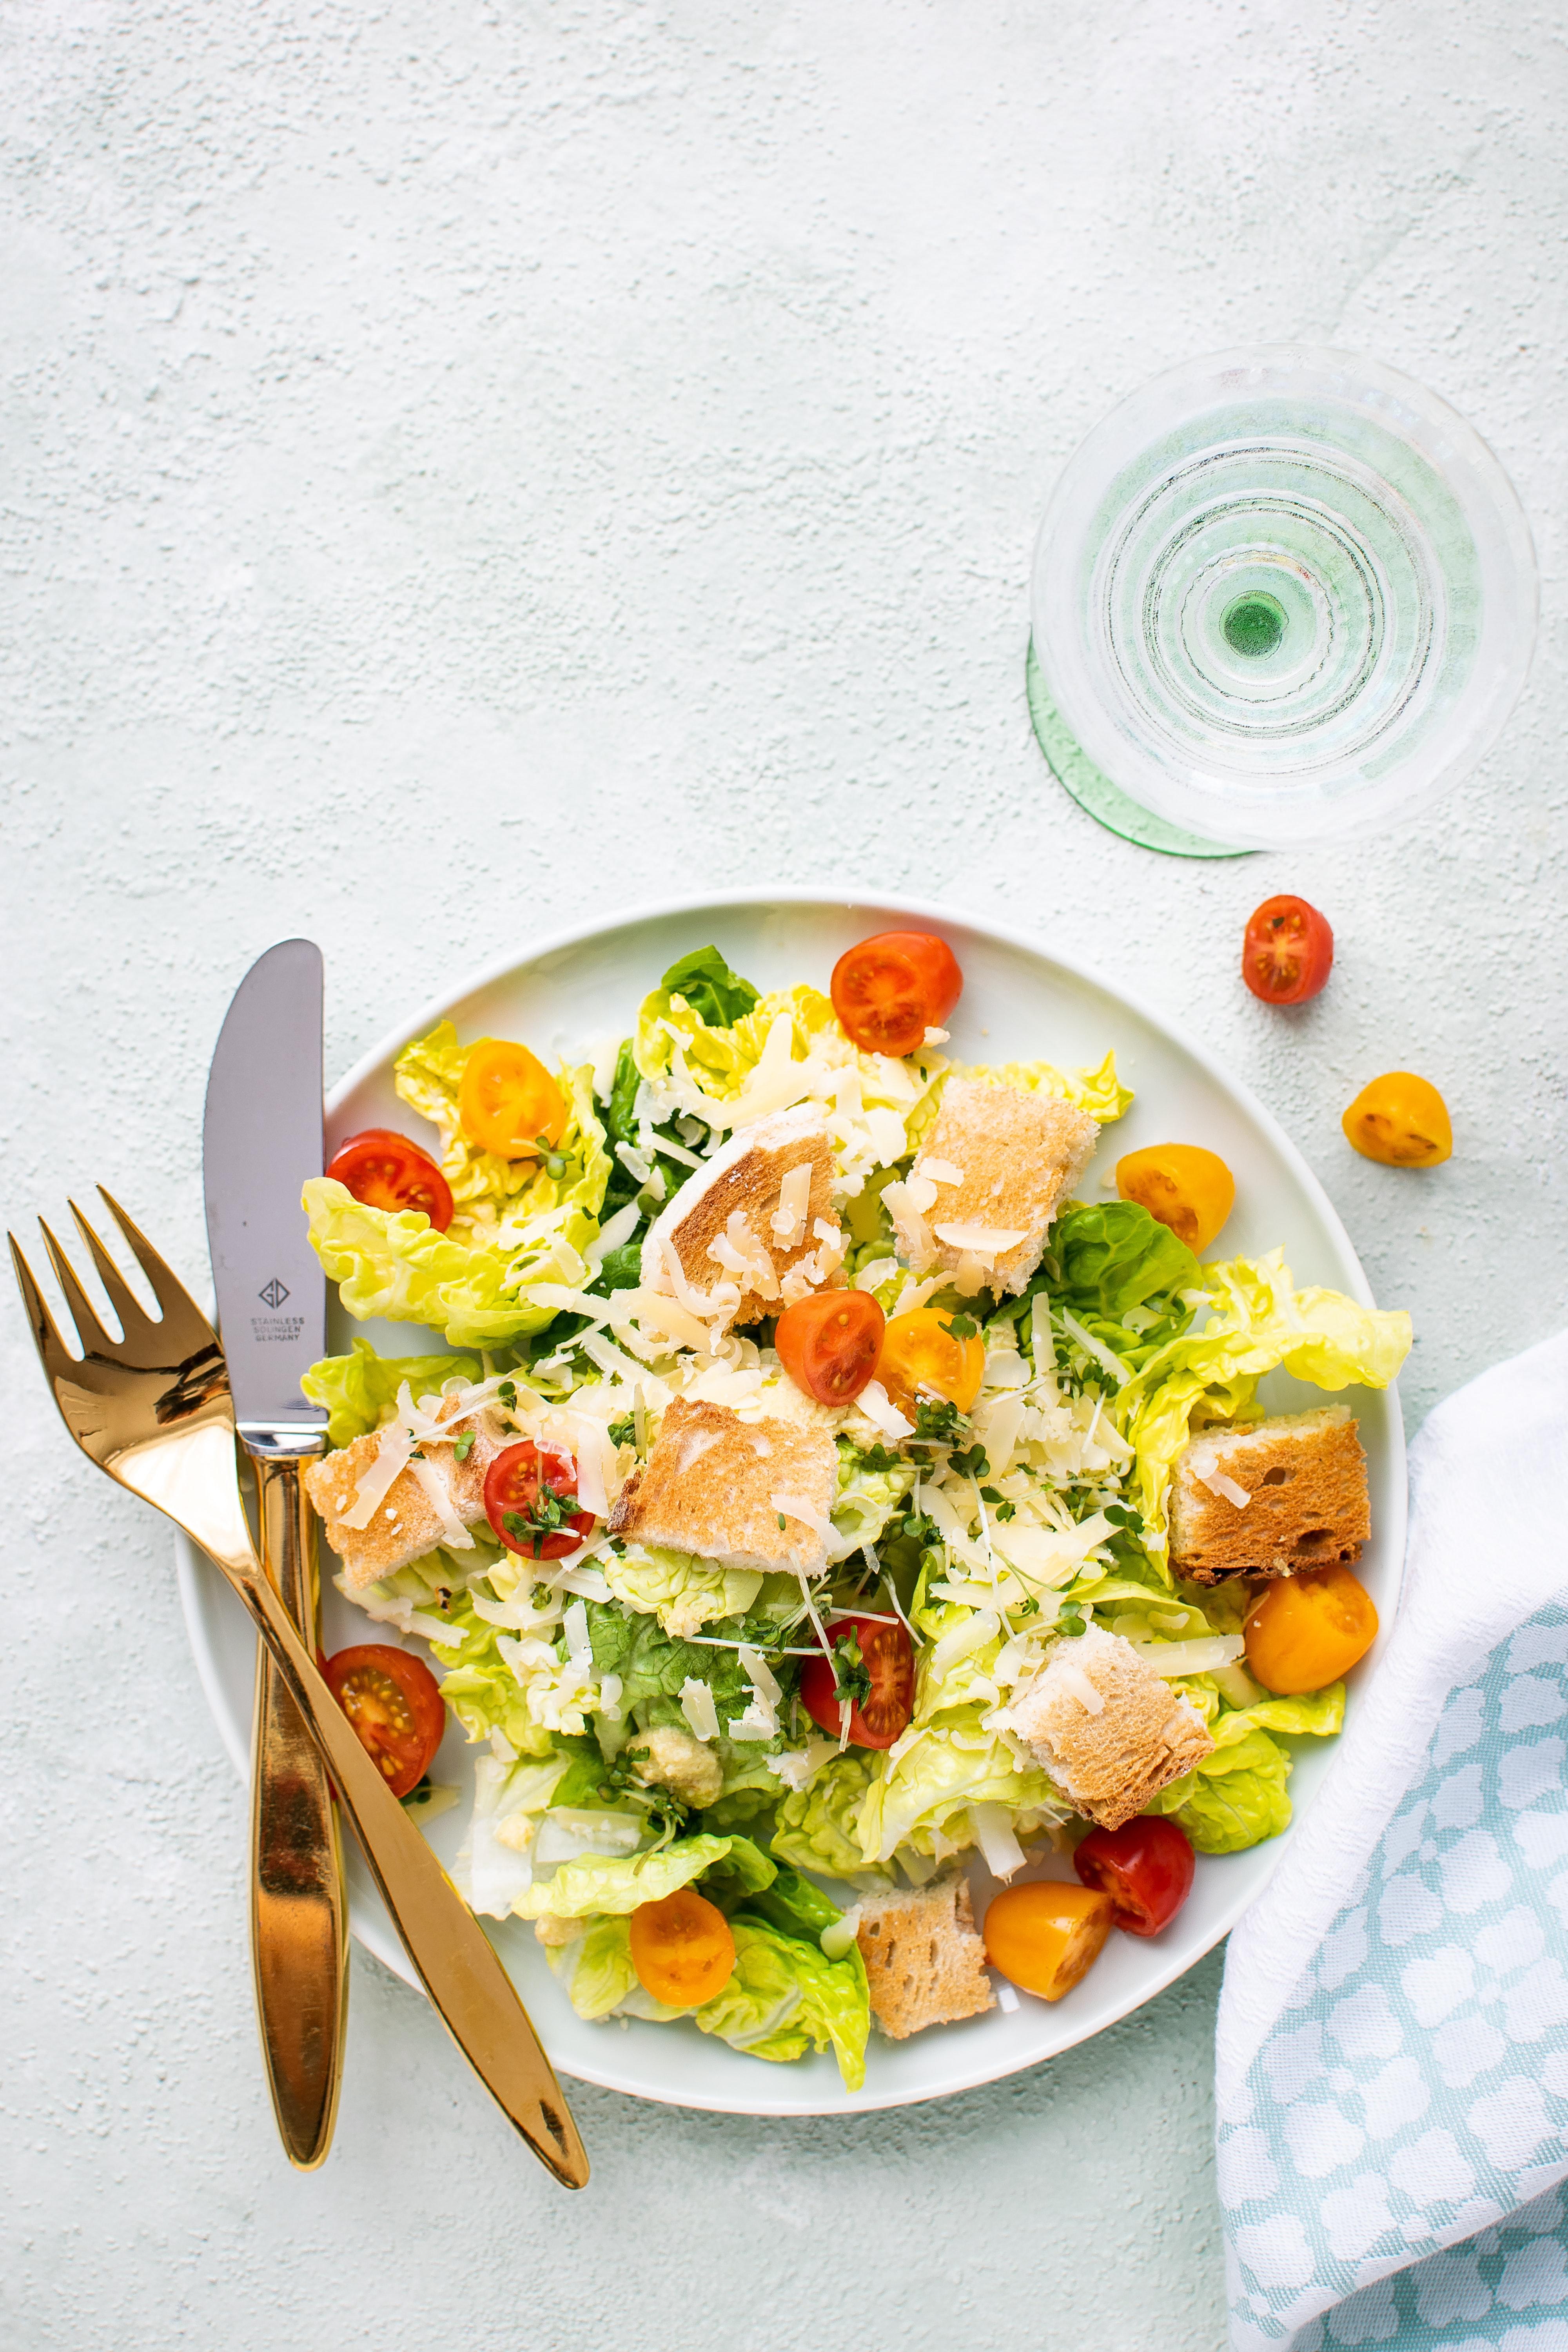 White plate with a mixed greens salad on top with gold fork and knife sitting on top next to a glass of water on a white background.